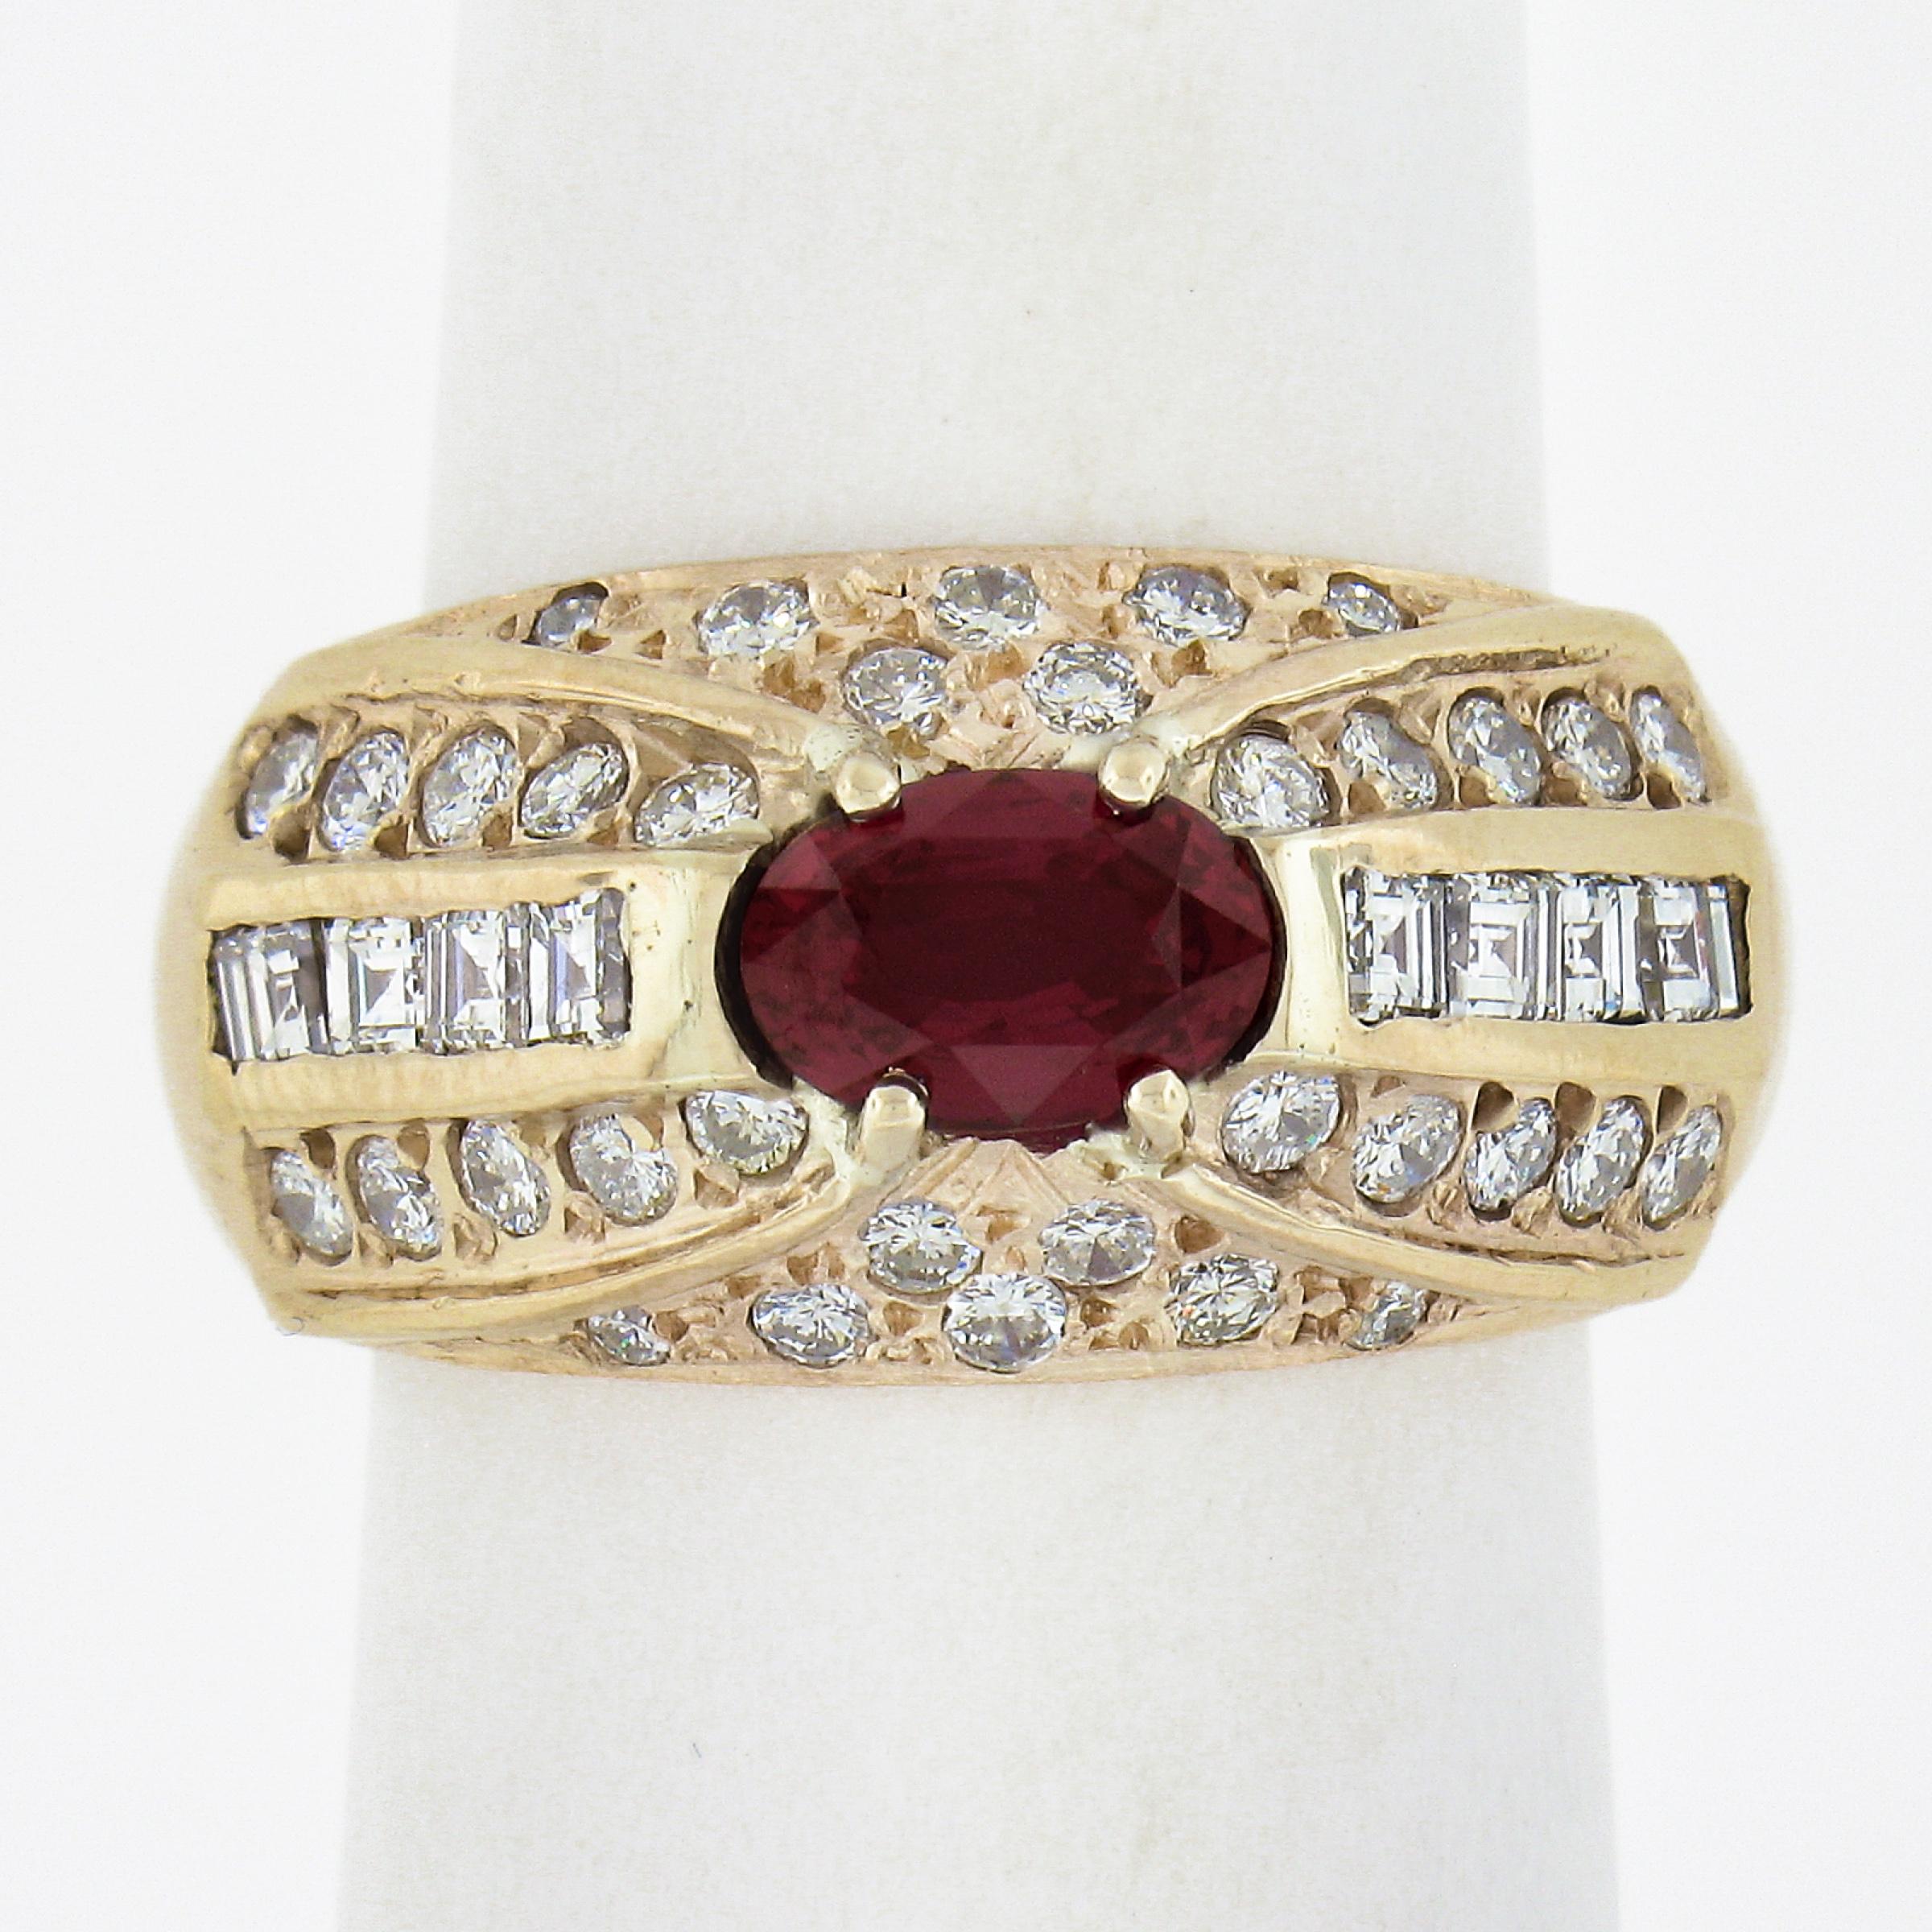 You're looking at a truly wonderful vintage ruby and diamond ring, refined in yellow gold and is set with fine quality gems throughout. The center stone is a GIA certified, Mozambique origin oval brilliant cut ruby that displays absolutely rich and